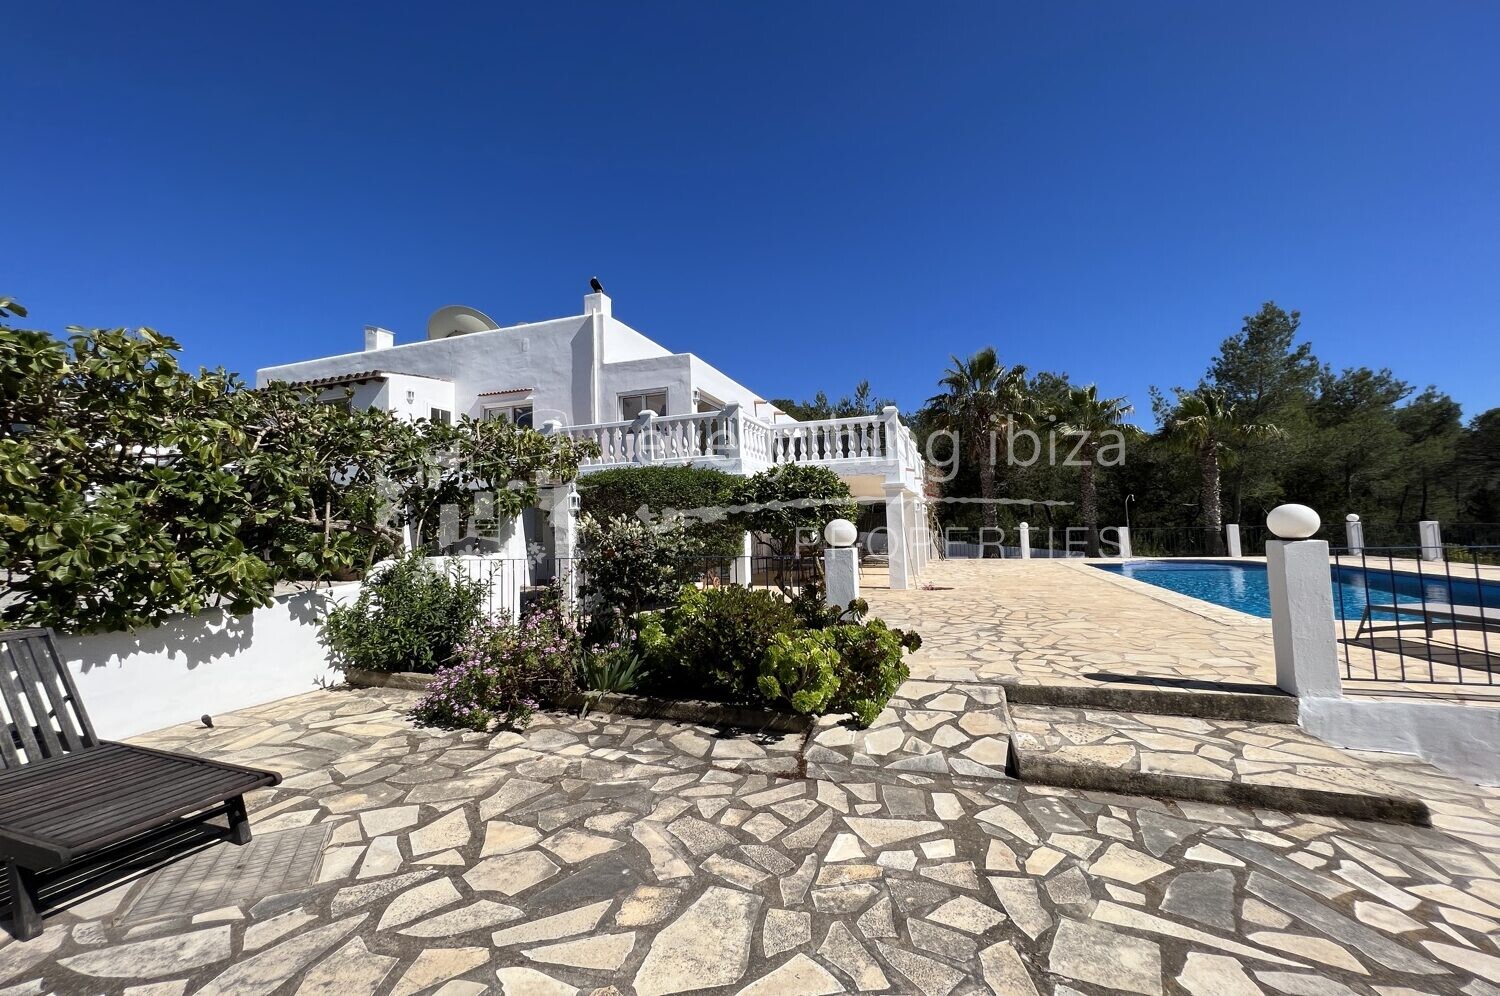 Beautiful Villa with Tourist License in Peaceful Countryside, ref. 1441, for sale in Ibiza by everything ibiza Properties